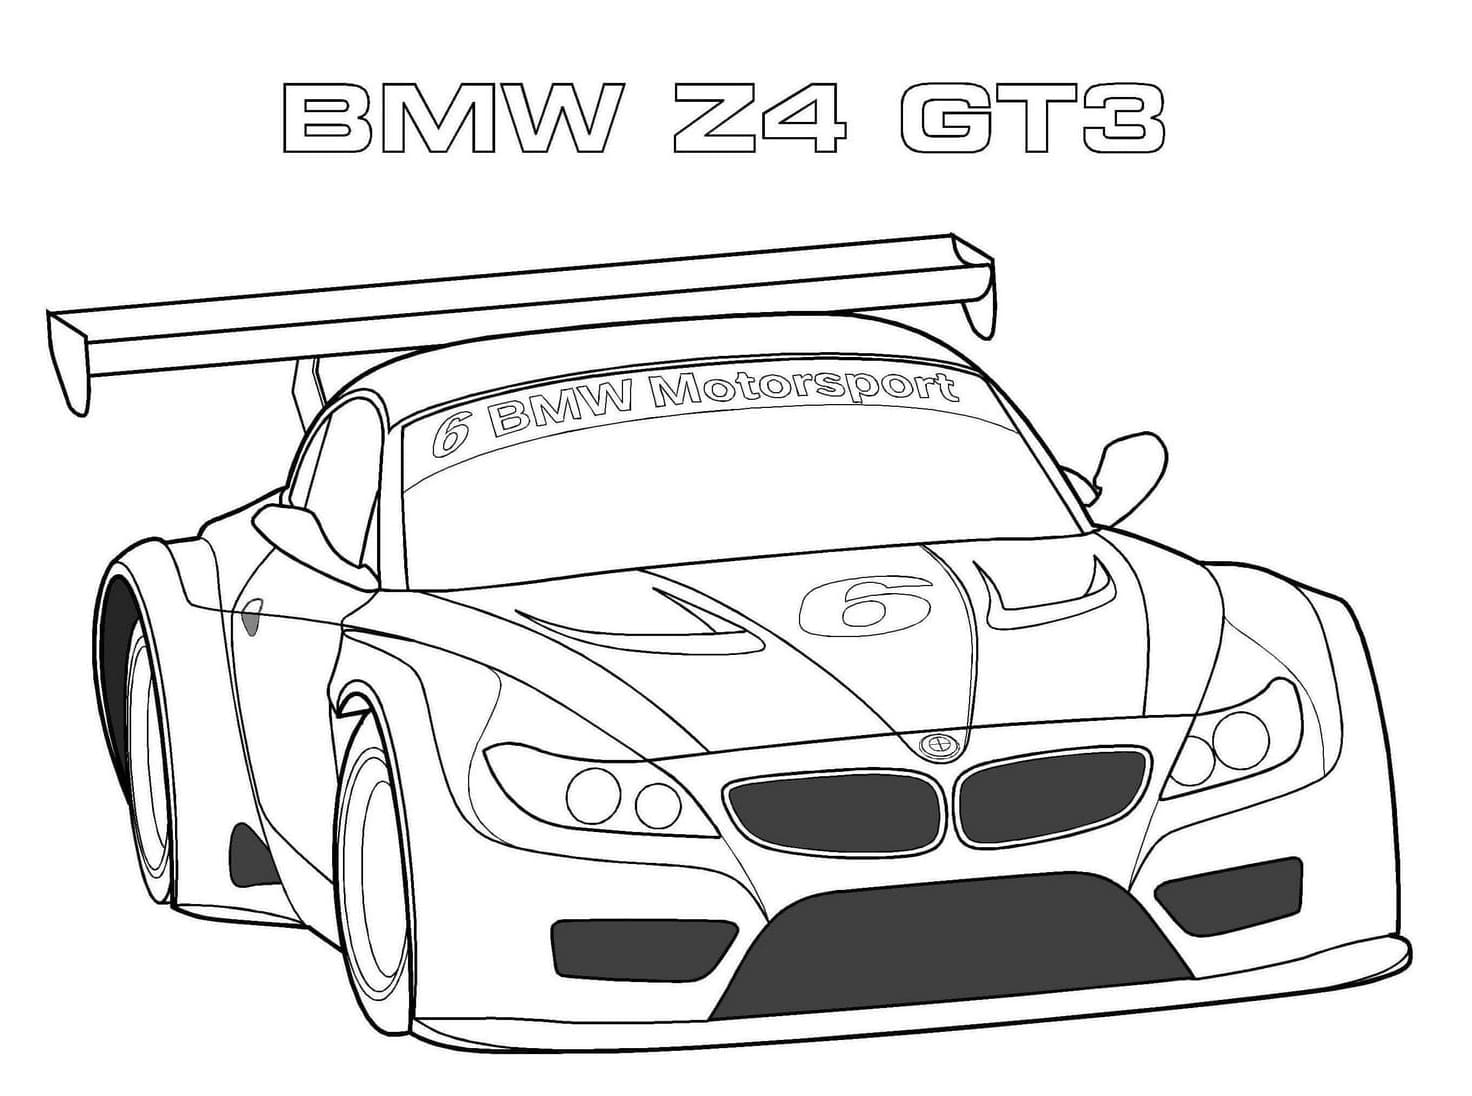 Voiture BMW Z4 GT3 coloring page